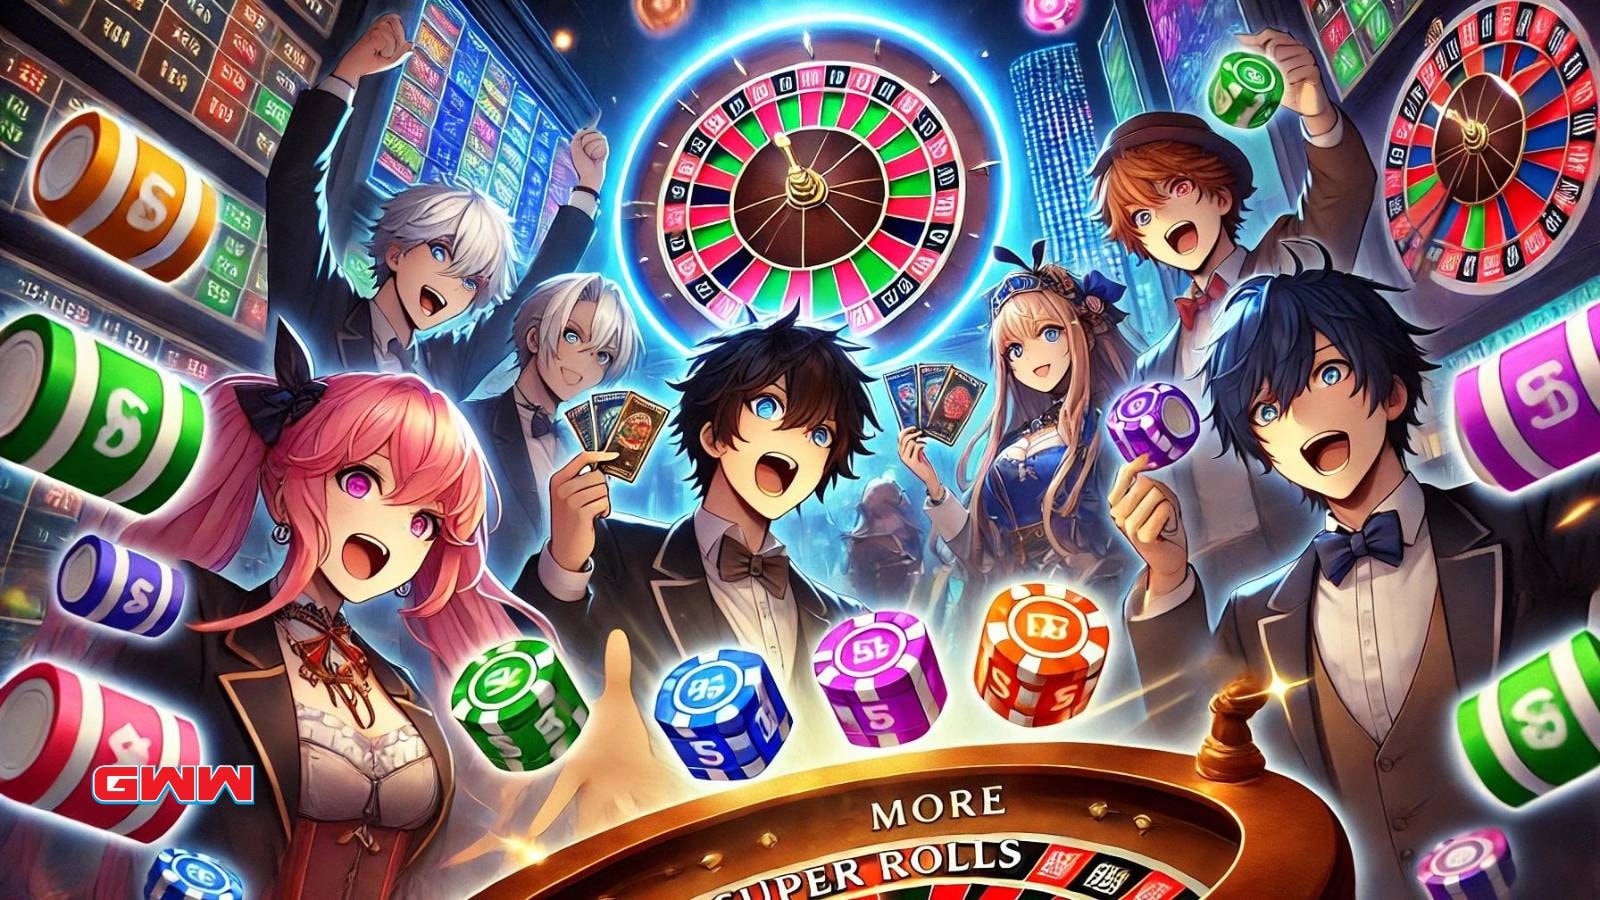 An anime-themed scene showcasing characters obtaining more super rolls in an anime roulette game.